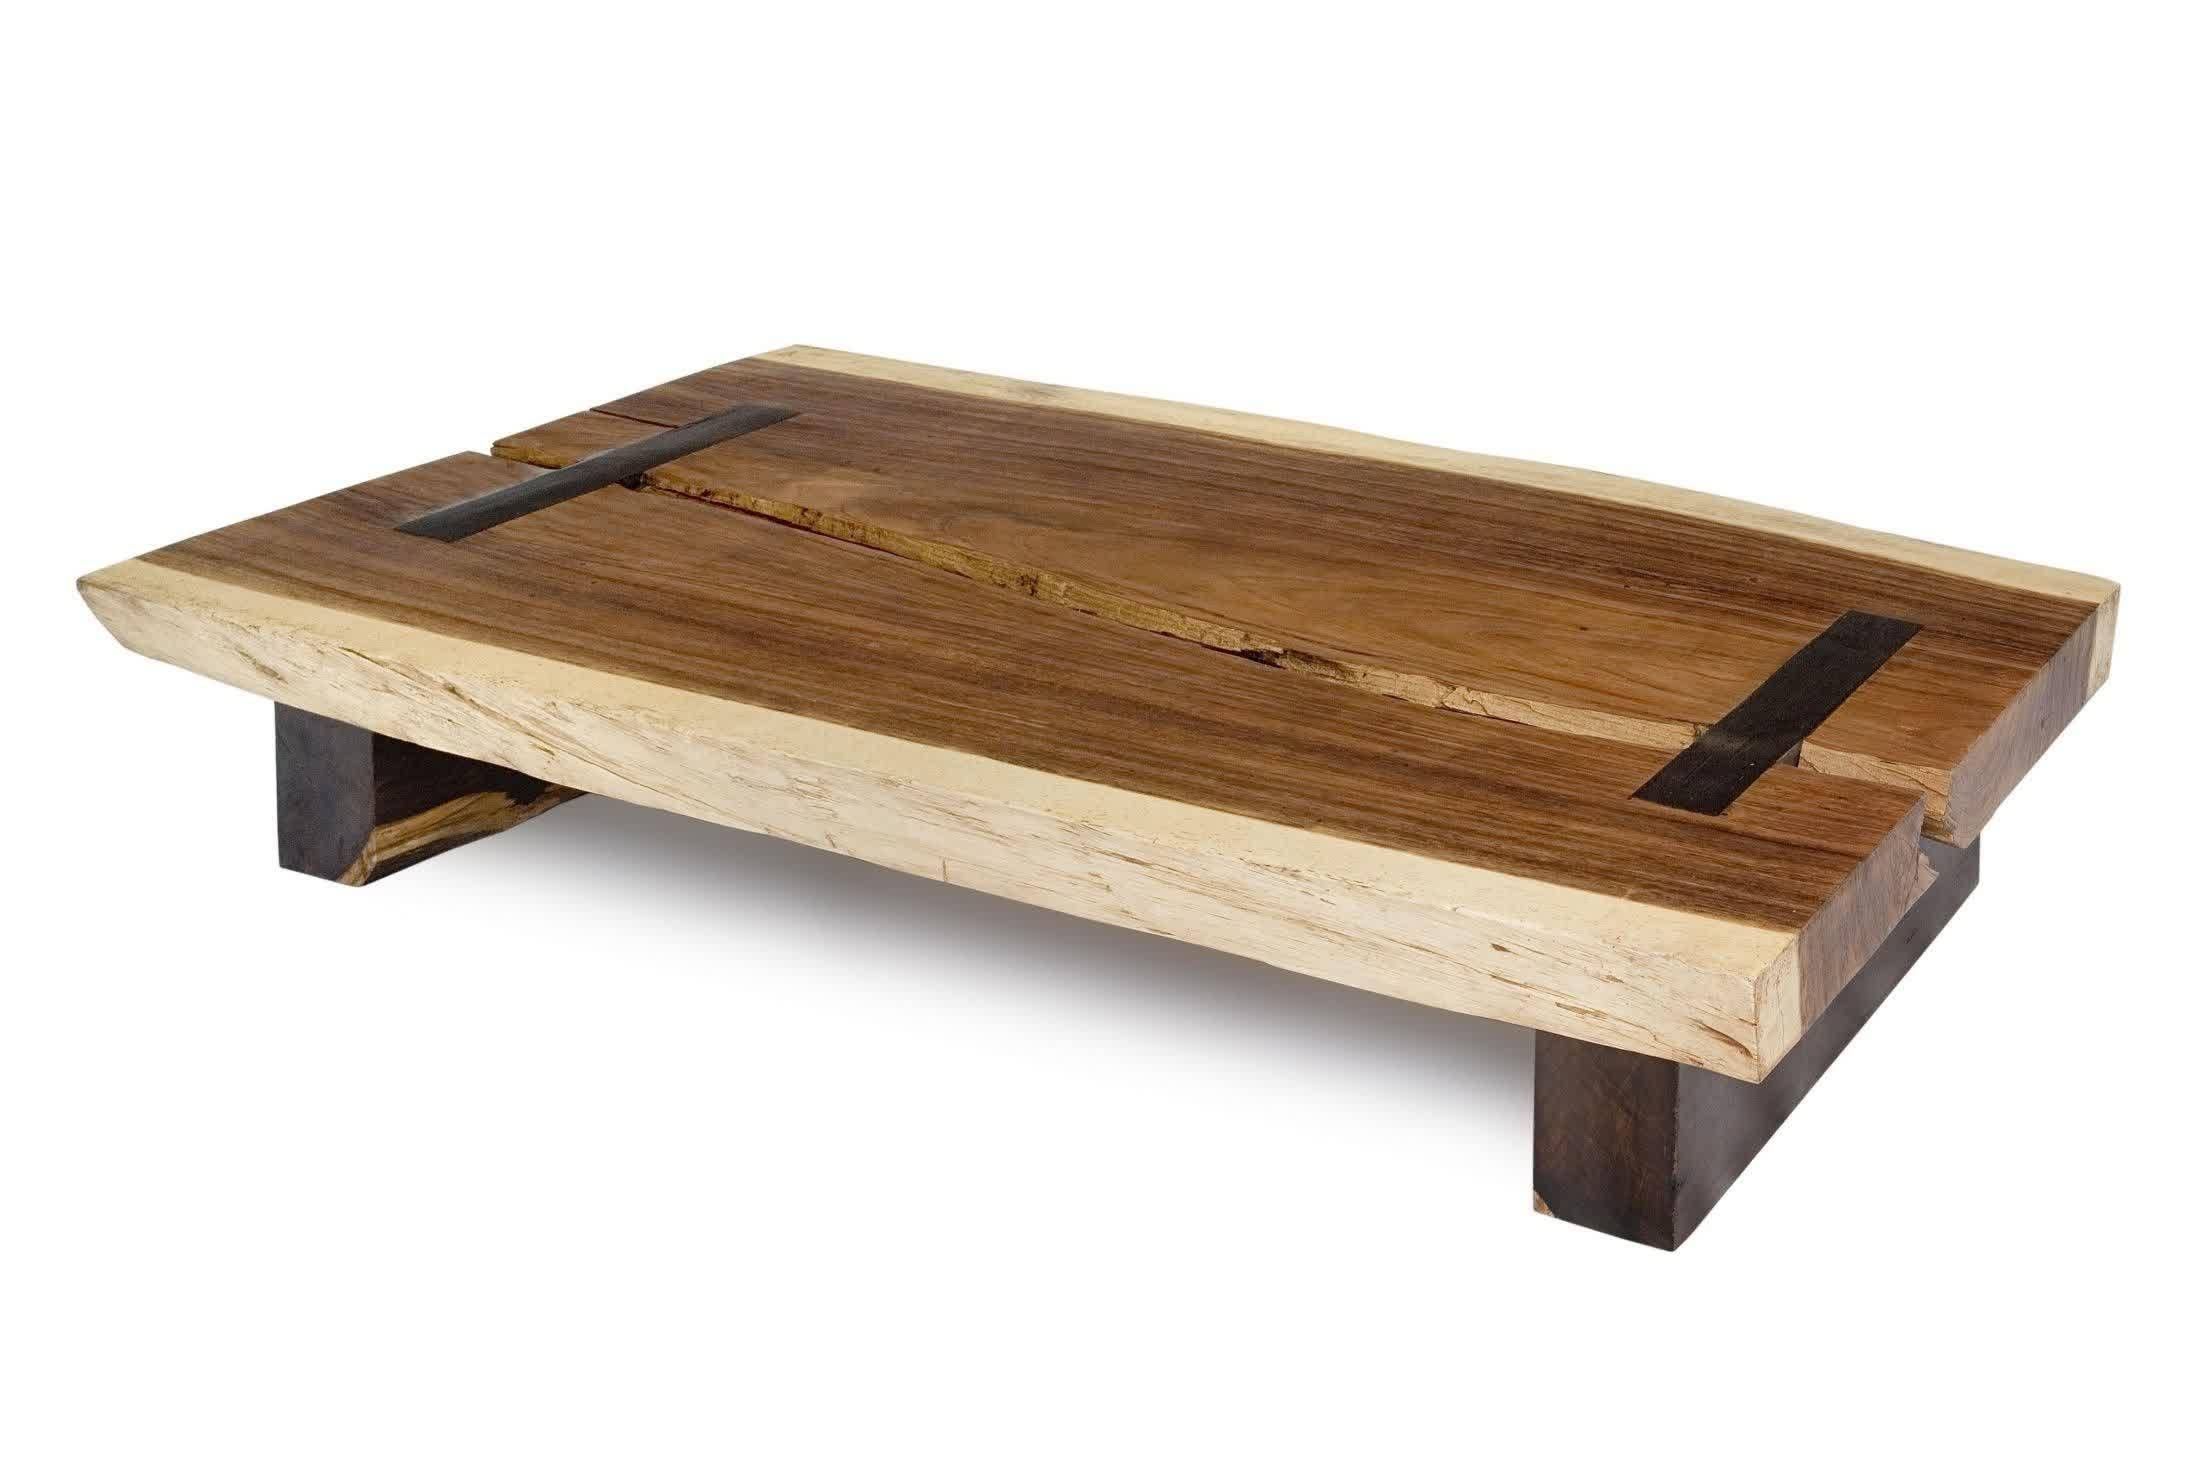 Low Coffee Table – Coffee Table Low Price, Low Indian Coffee Table In Stylish Coffee Tables (View 21 of 30)